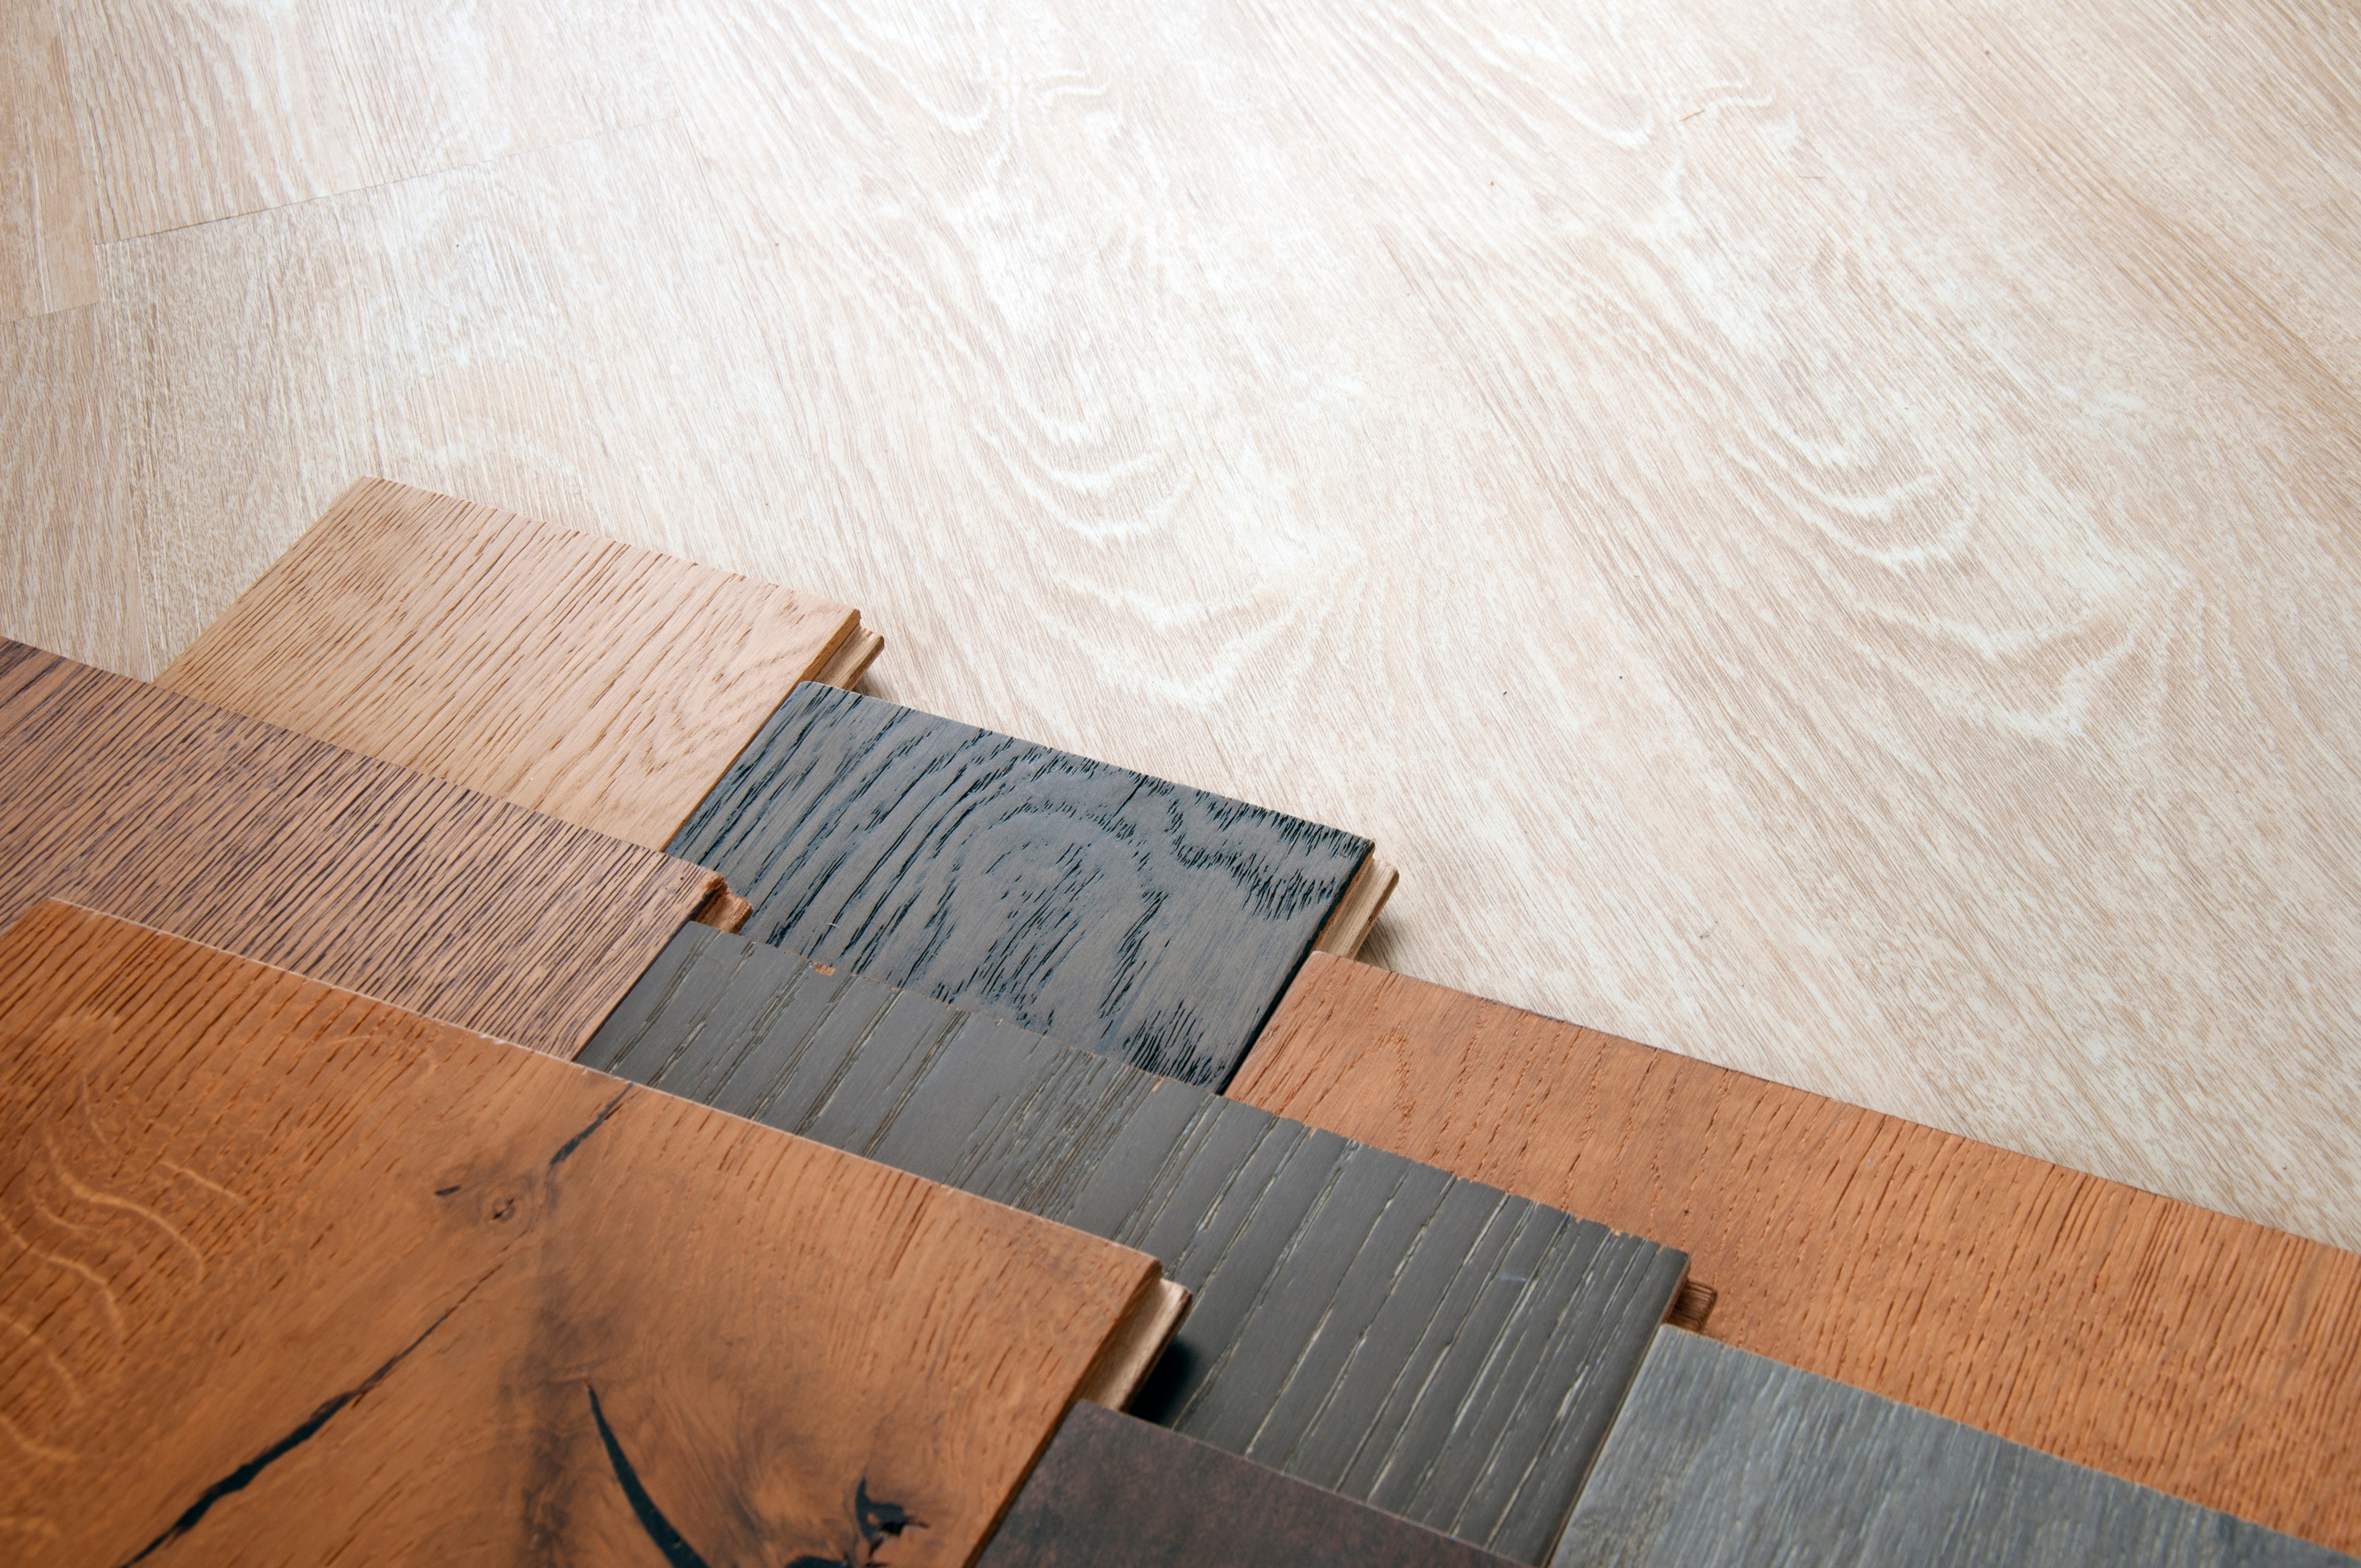 Prefinished Hardwood Flooring Is It, Cost To Install Prefinished Hardwood Floors